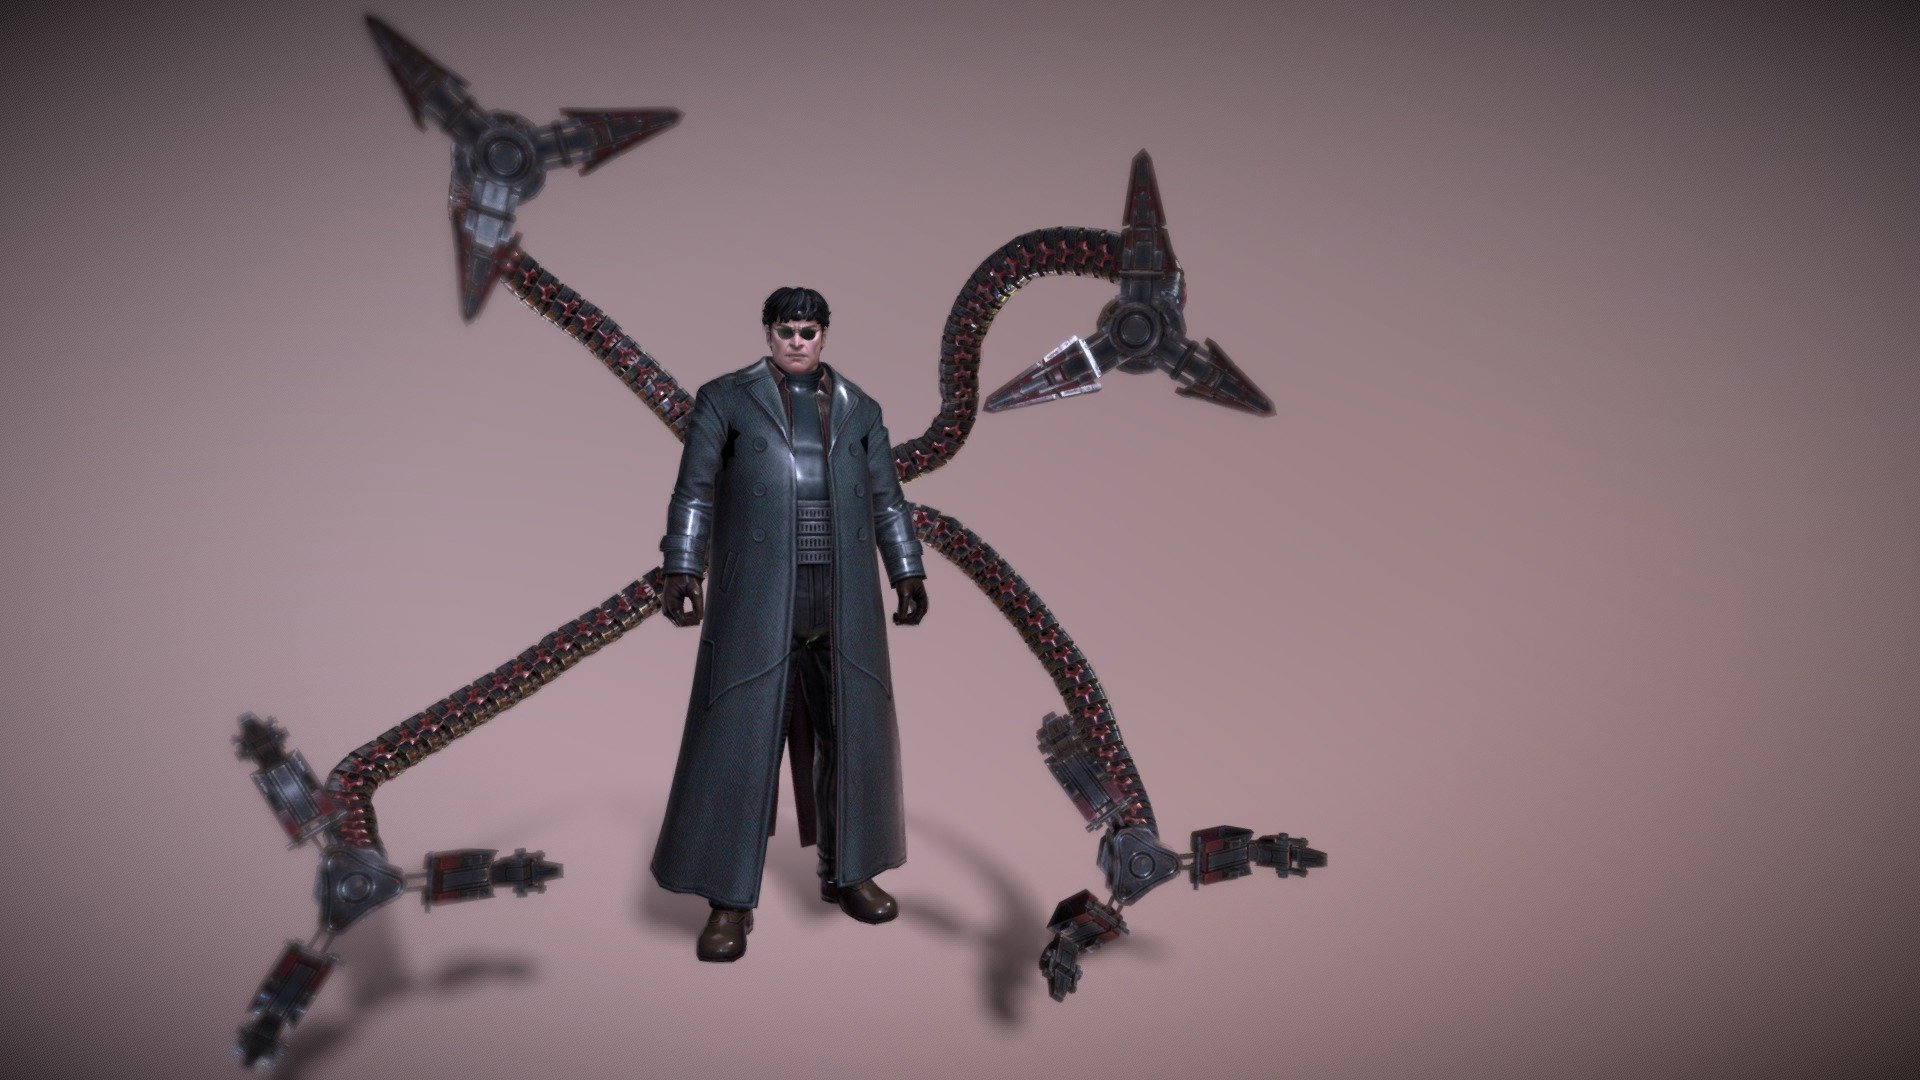 About the model
Doctor Octopus is available for download for your game development, concept art, 3D Rendering, Archviz work.


Follow me my social media




Youtube (PvZ Channel, Spanish): https://www.youtube.com/@Kabiidev




Youtube (Game Modding and DevBlogs, English): https://www.youtube.com/@SpiderwareMods




Twitter: https://www.twitter.com/Kabiidev




Other Social Media: https://beacons.ai/kabiidev




Add me as friend by discord: kabiidev




About me
Hi, I am Kabiidev, Indie Game Developer, 3D/2D artist and Game Modder. On my Sketchfab page, I upload amazing models for your projects, give me credit if it is possible.


If you like this 3D Model, I hope that you like this others uploaded by me
Electro (NWH): https://skfb.ly/oM8Gy

Spider-man (NWH): https://skfb.ly/oNoEq 

Mysterio (FFH): https://skfb.ly/oKsM8

Vulture (HC): https://skfb.ly/oMrN6 - Spider-man (NWH) - Doctor Octopus - Download Free 3D model by Kabiidev 3d model